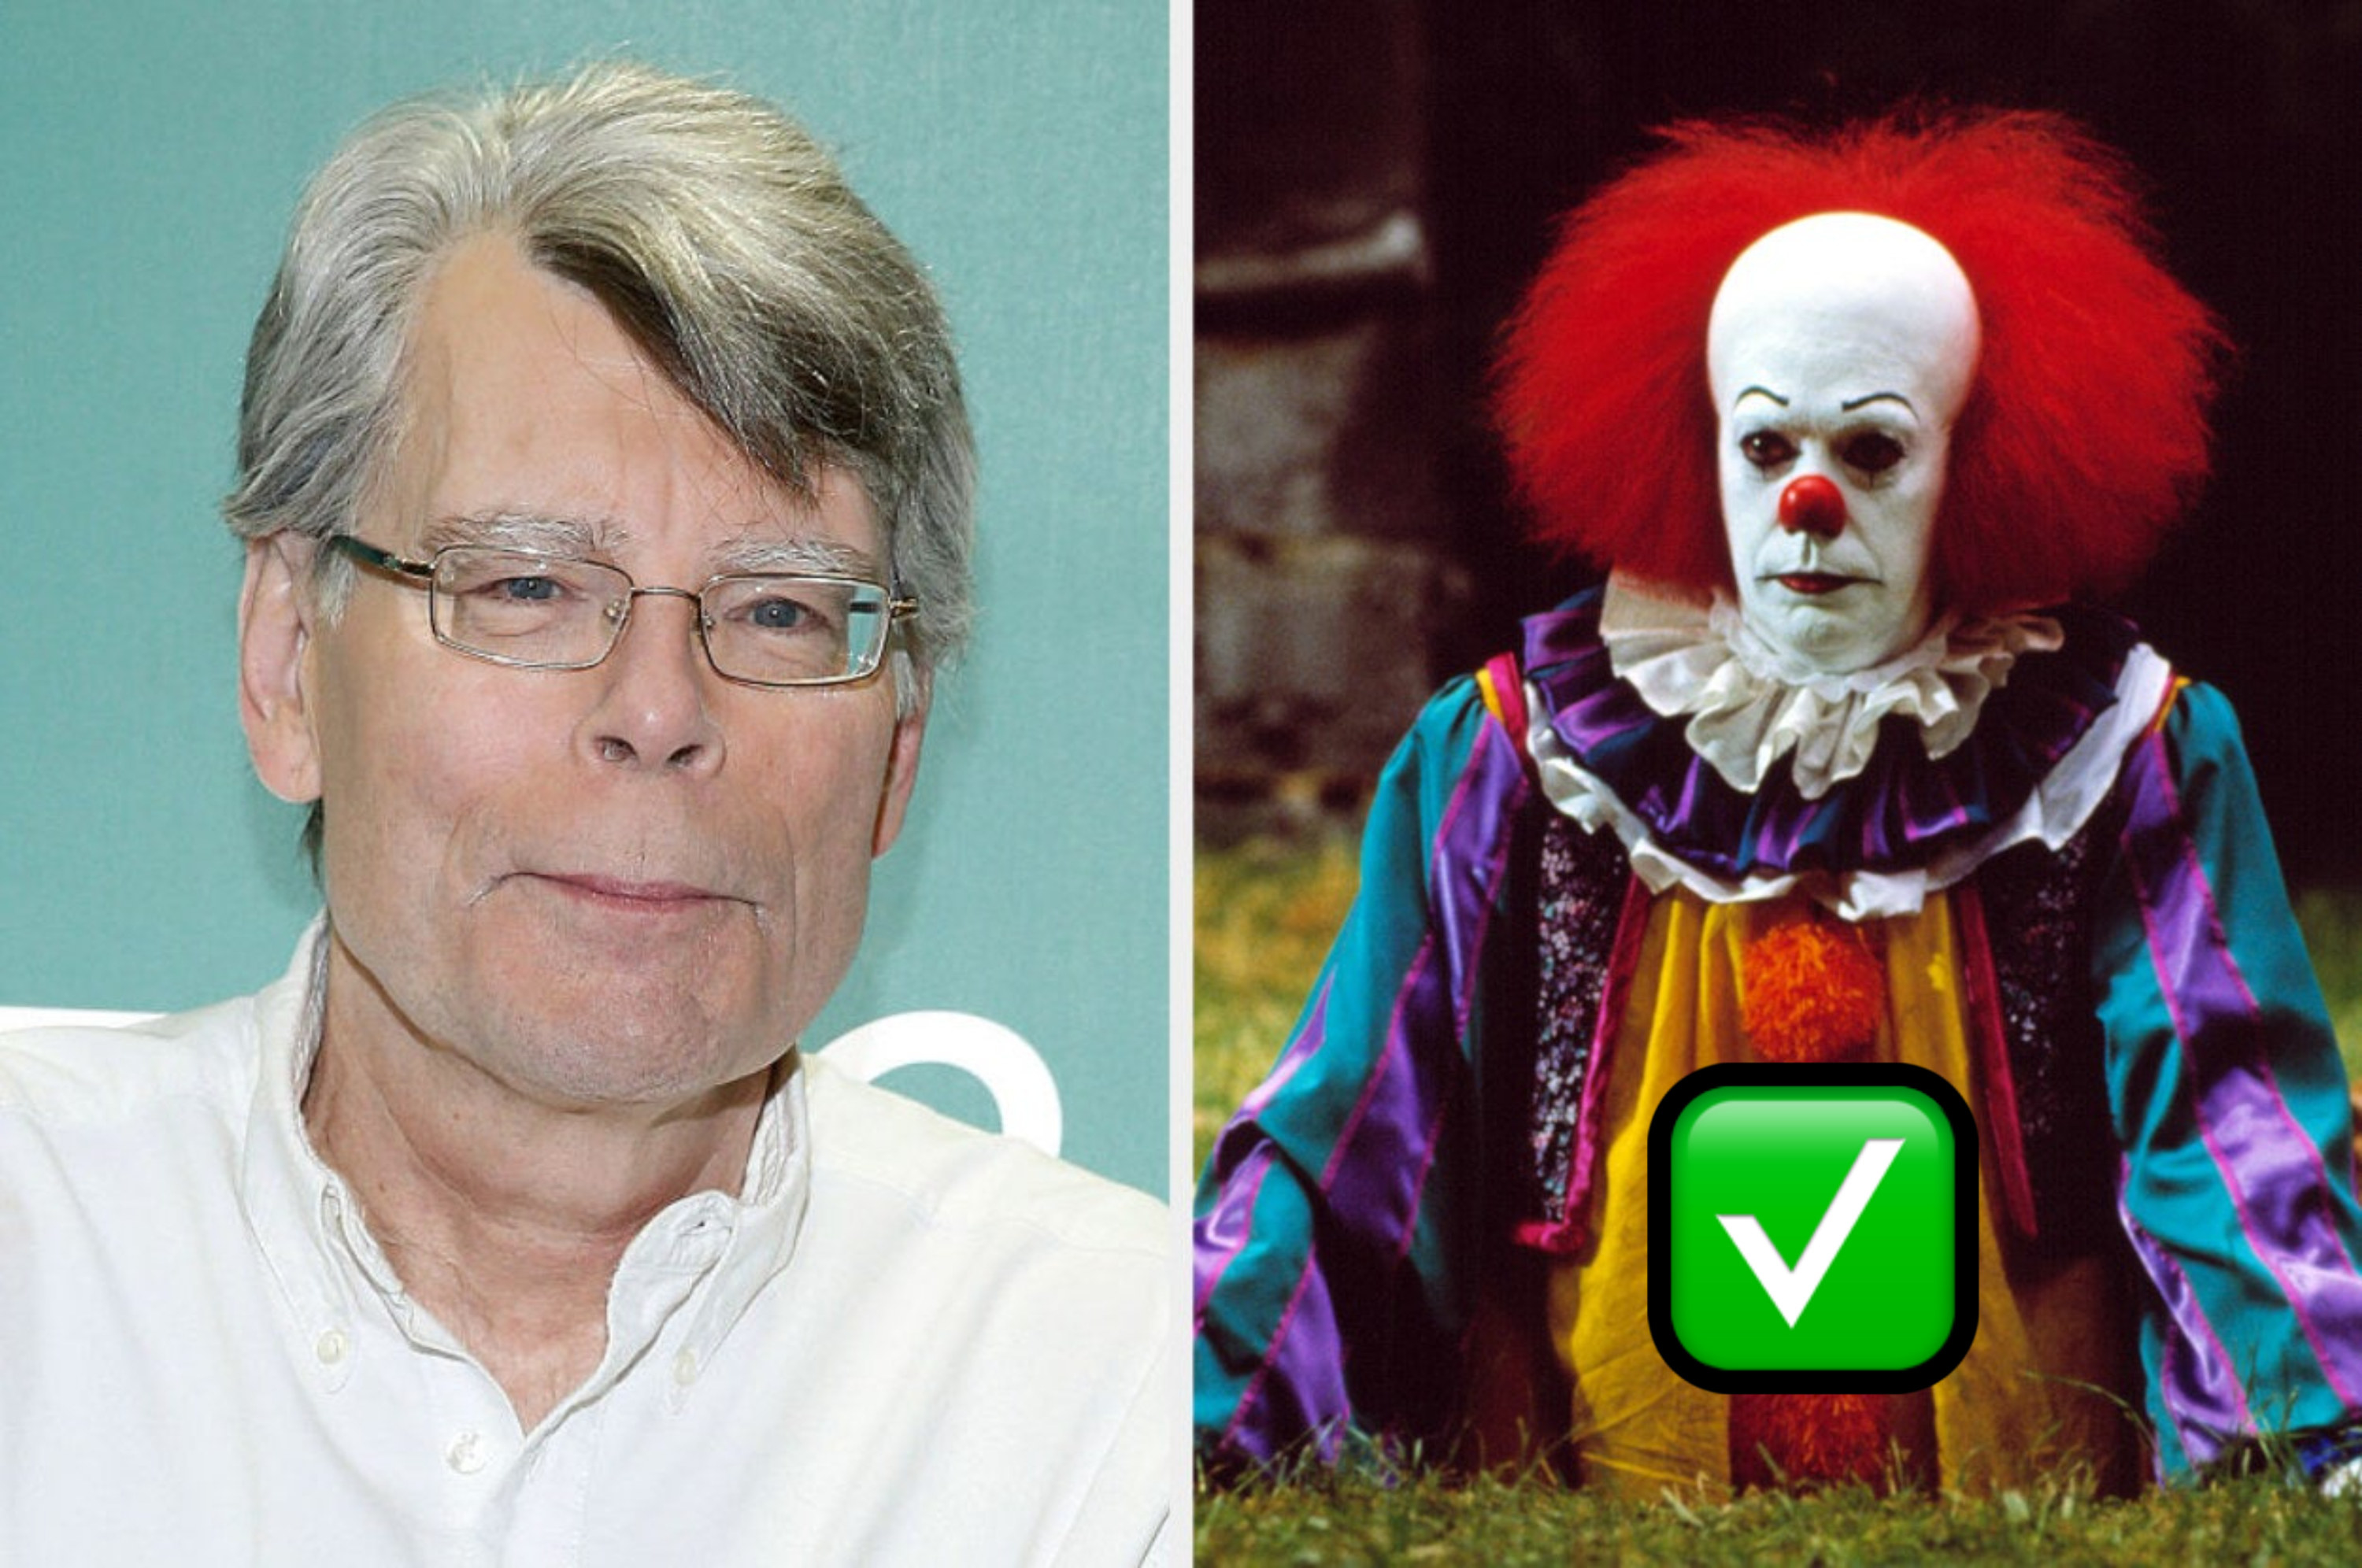 Stephen King and Tim Curry as Pennywise